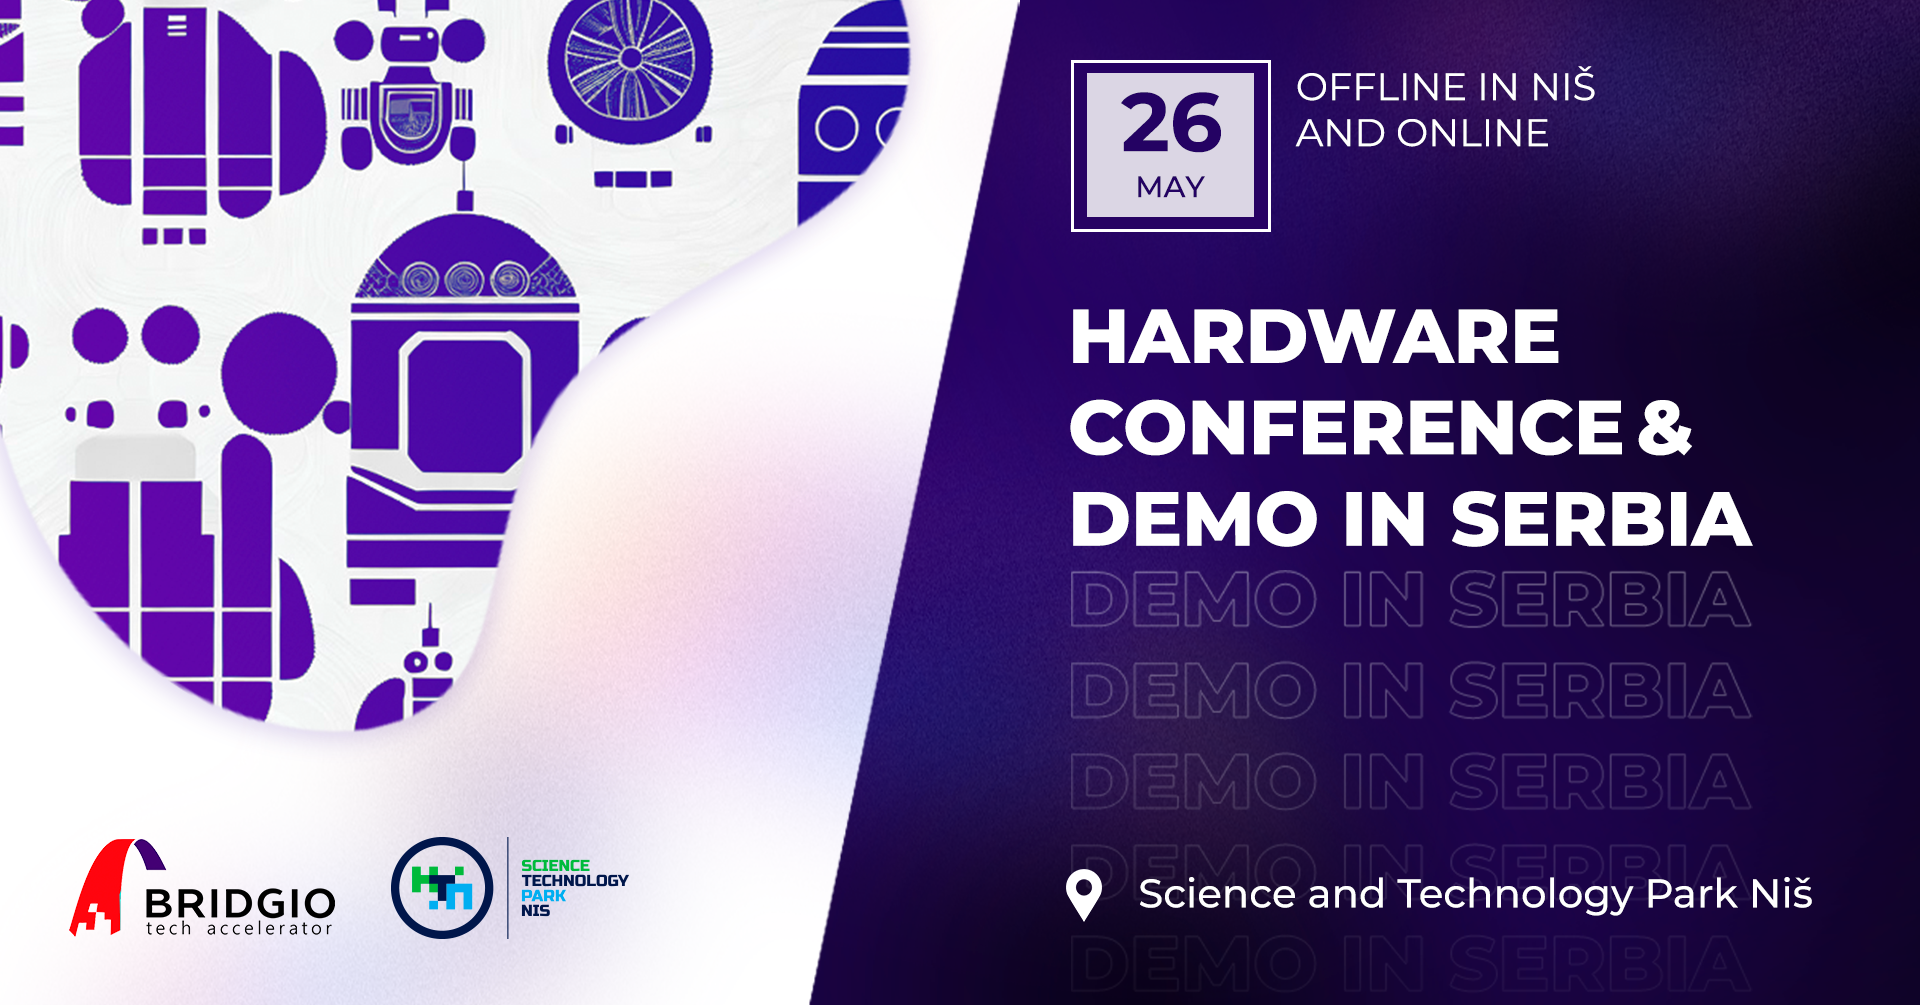 HARDWARE CONFERENCE & DEMO IN SERBIA